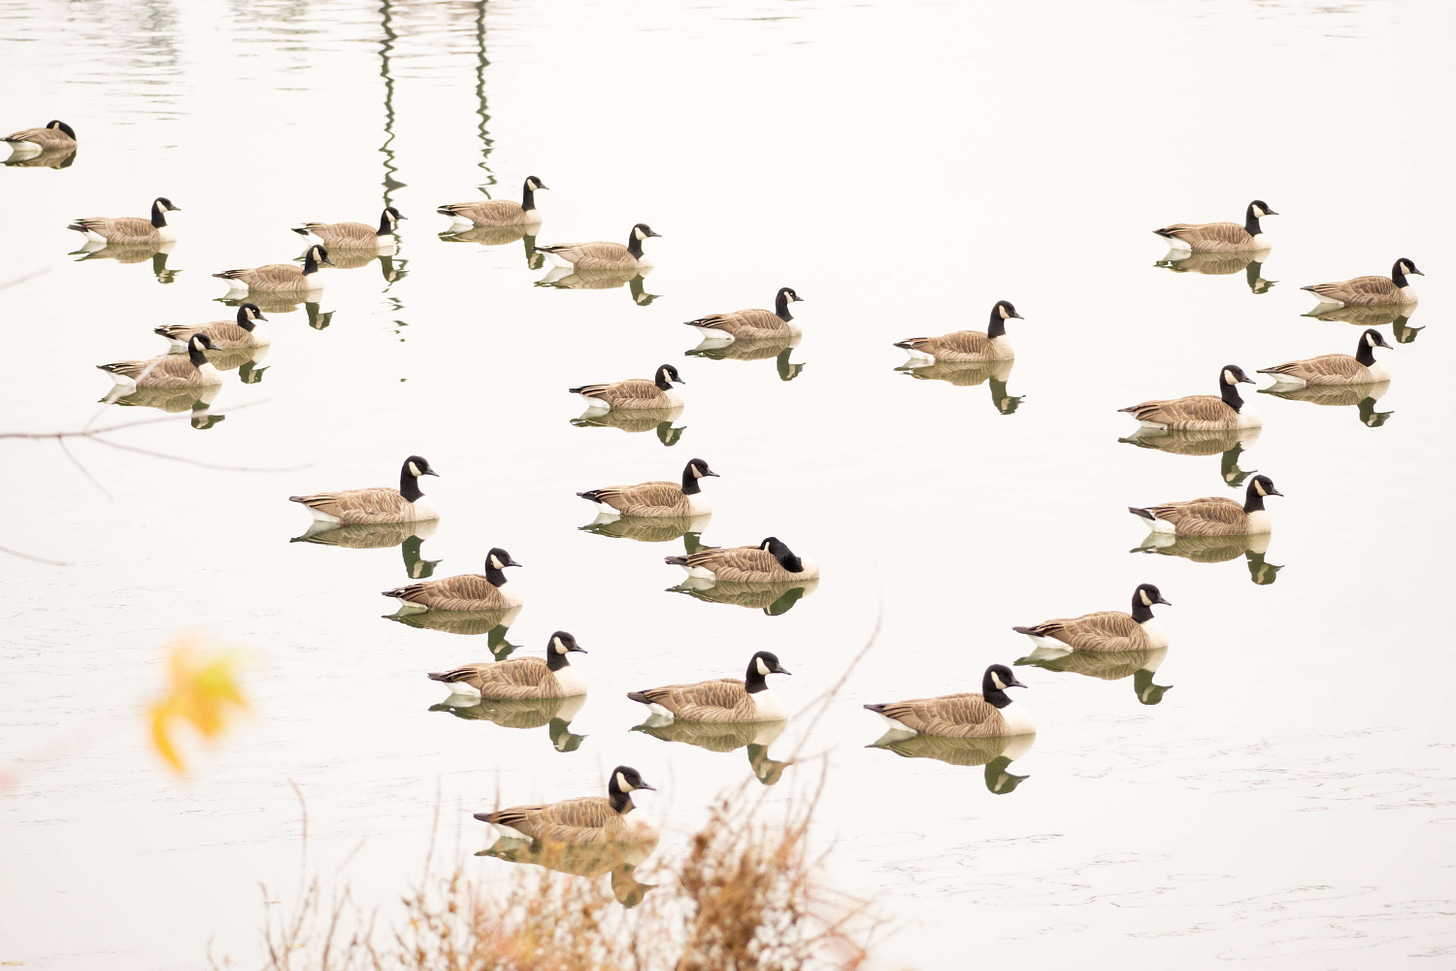 Image shows two dozen Canada geese floating atop their reflections on a perfectly calm stream, facing into a winter breeze.